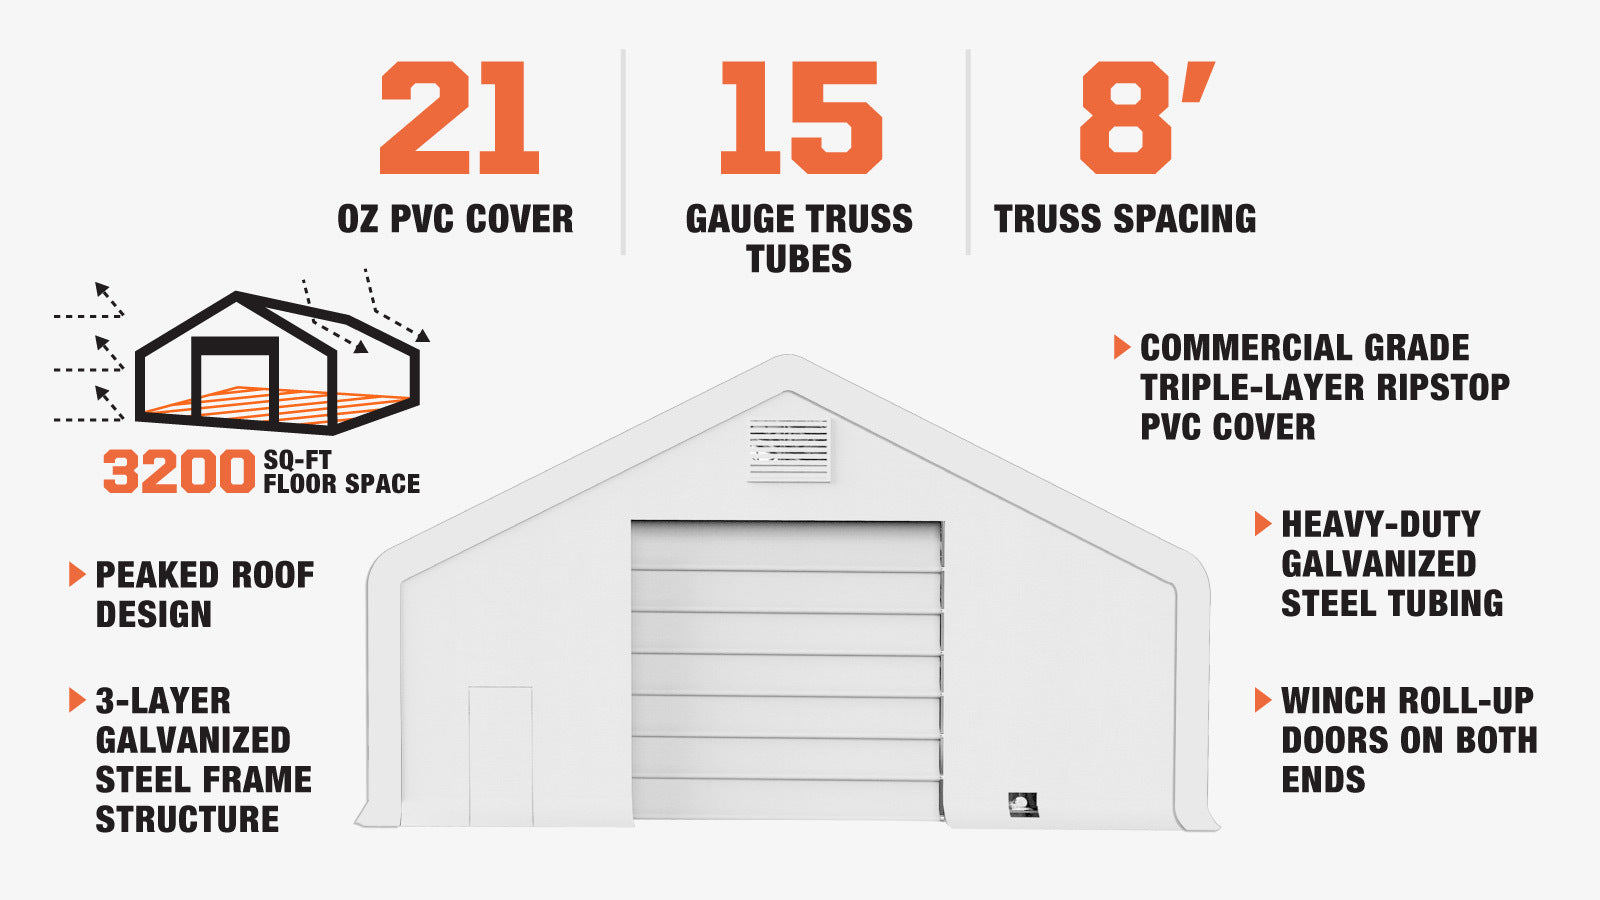 TMG Industrial Pro Series 40' x 80' Dual Truss Storage Shelter with Heavy Duty 21 oz PVC Cover & Drive Through Doors, TMG-DT4081-PRO(Previously TMG-DT4080-PRO)-description-image